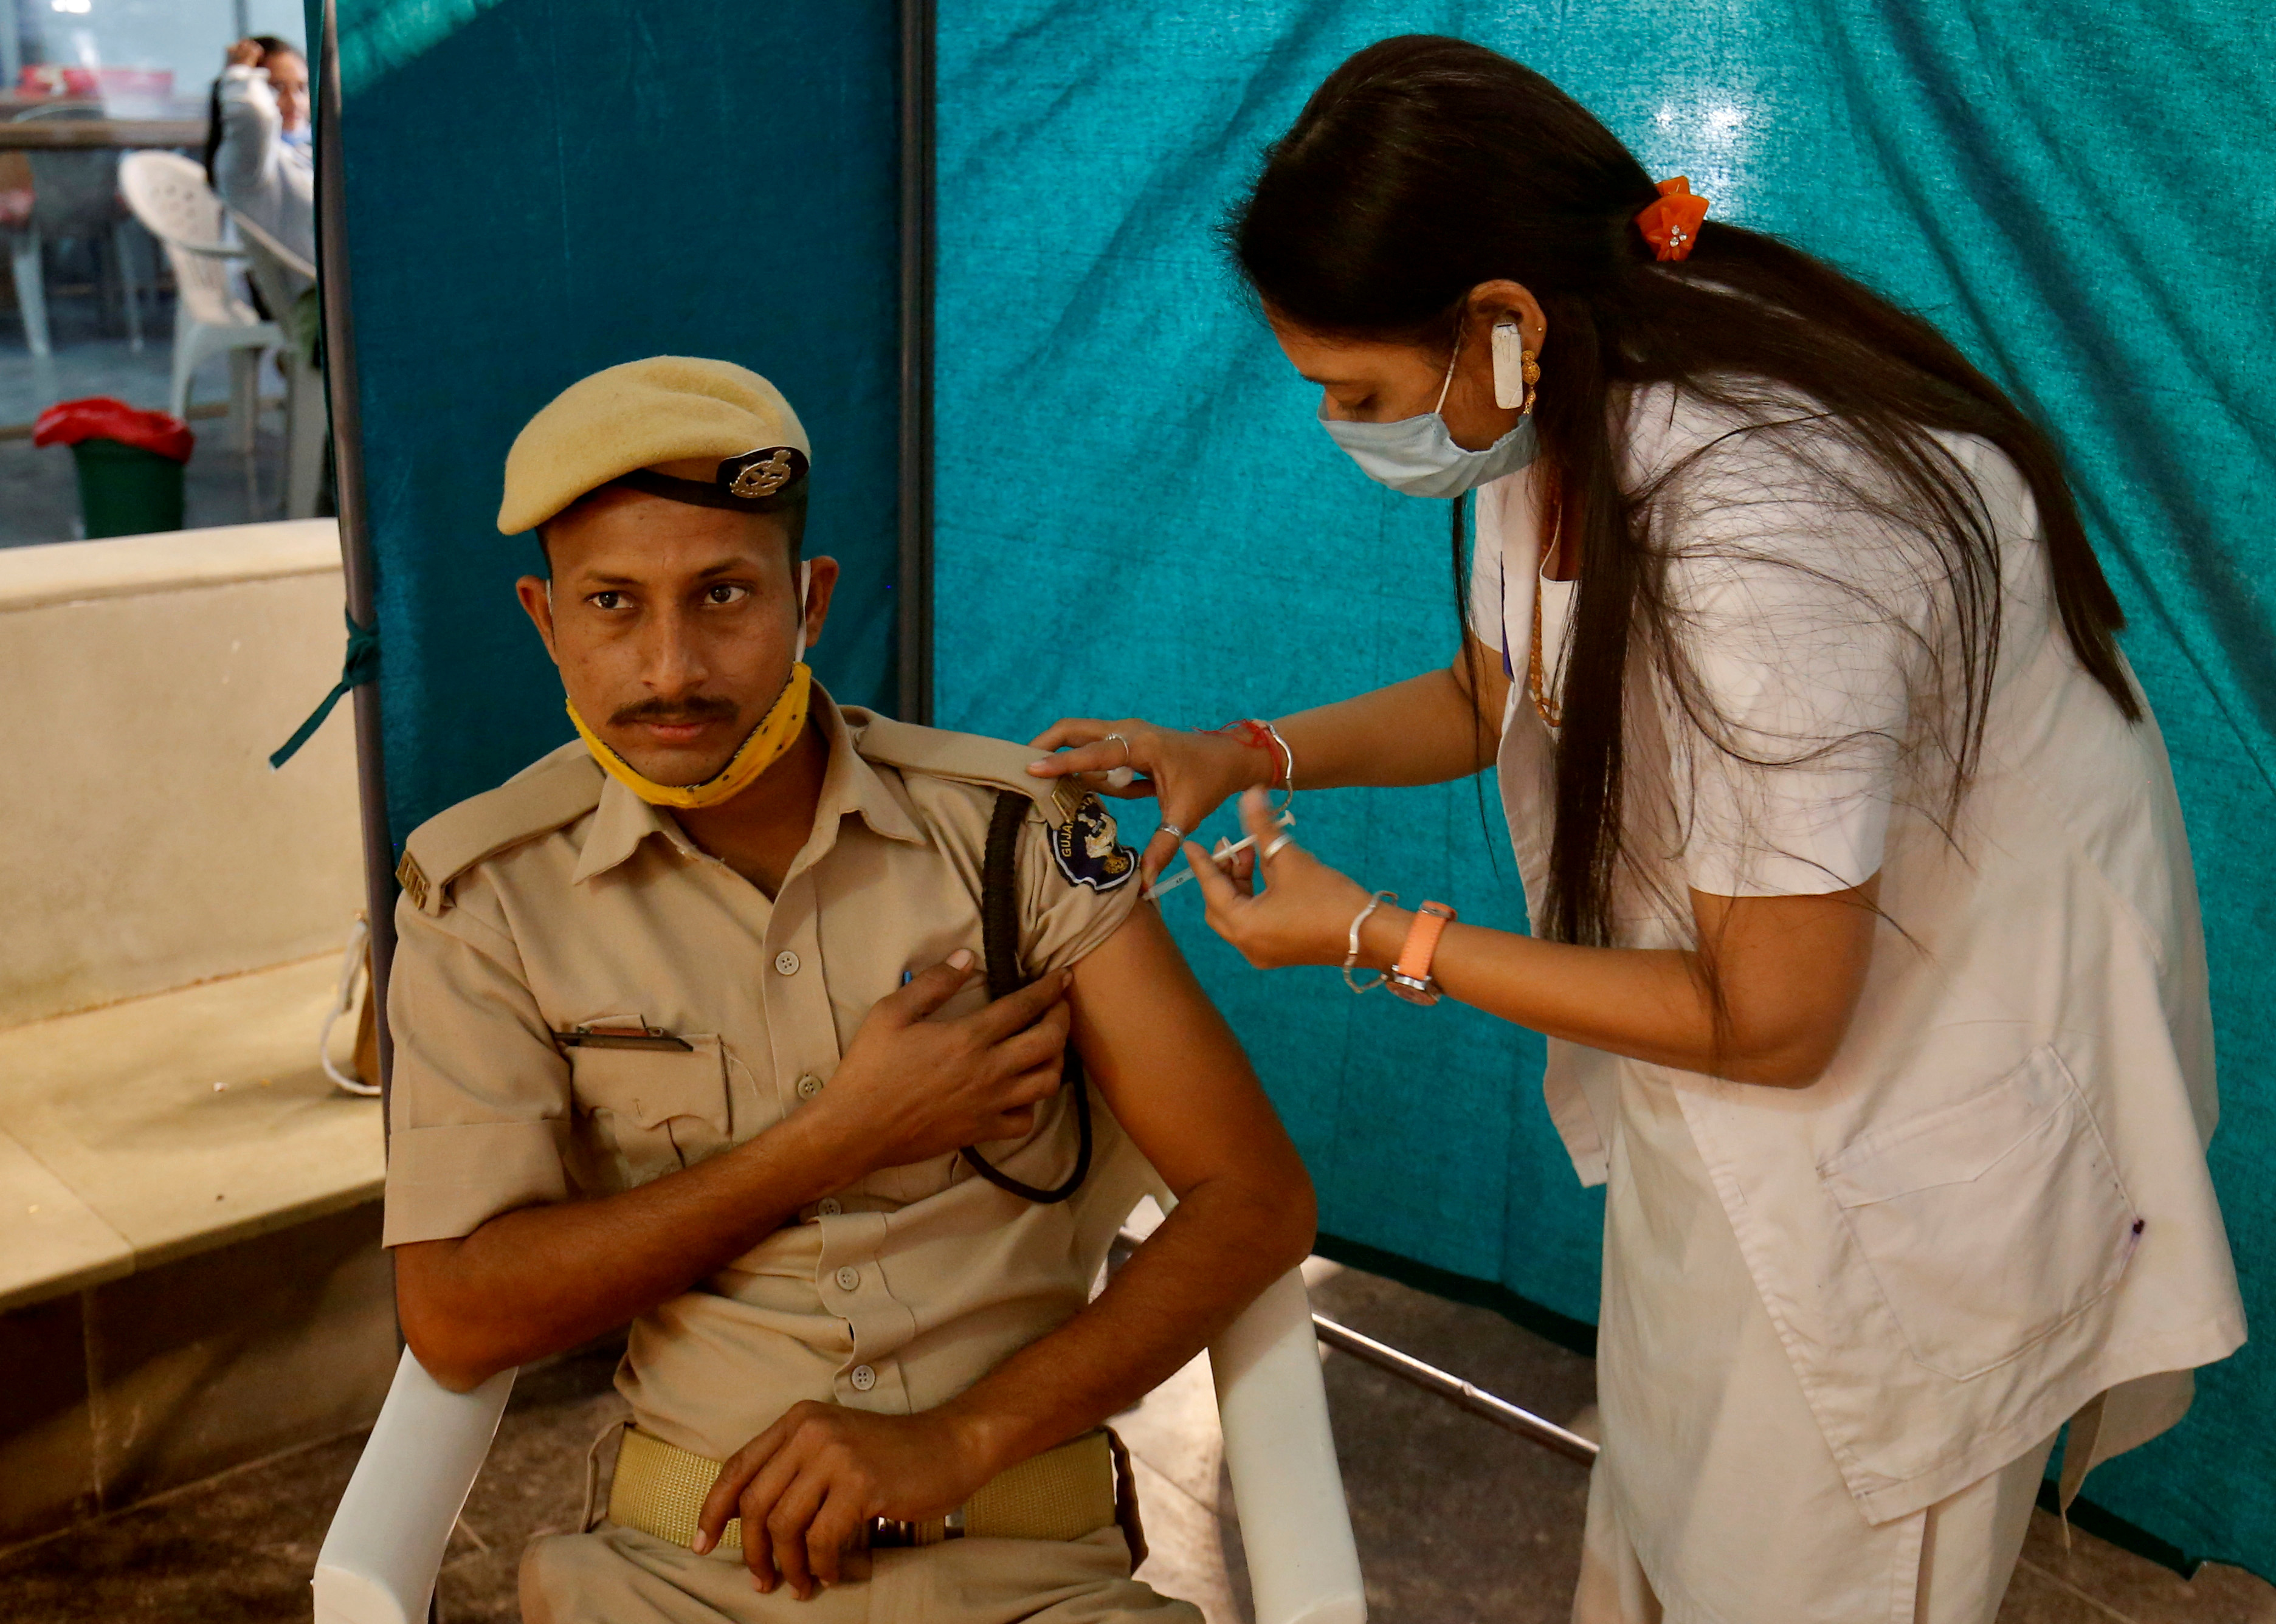 A policeman receives a dose of COVISHIELD, a COVID-19 vaccine manufactured by Serum Institute of India, at a vaccination centre in Ahmedabad, India, February 4, 2021. REUTERS/Amit Dave/File Photo